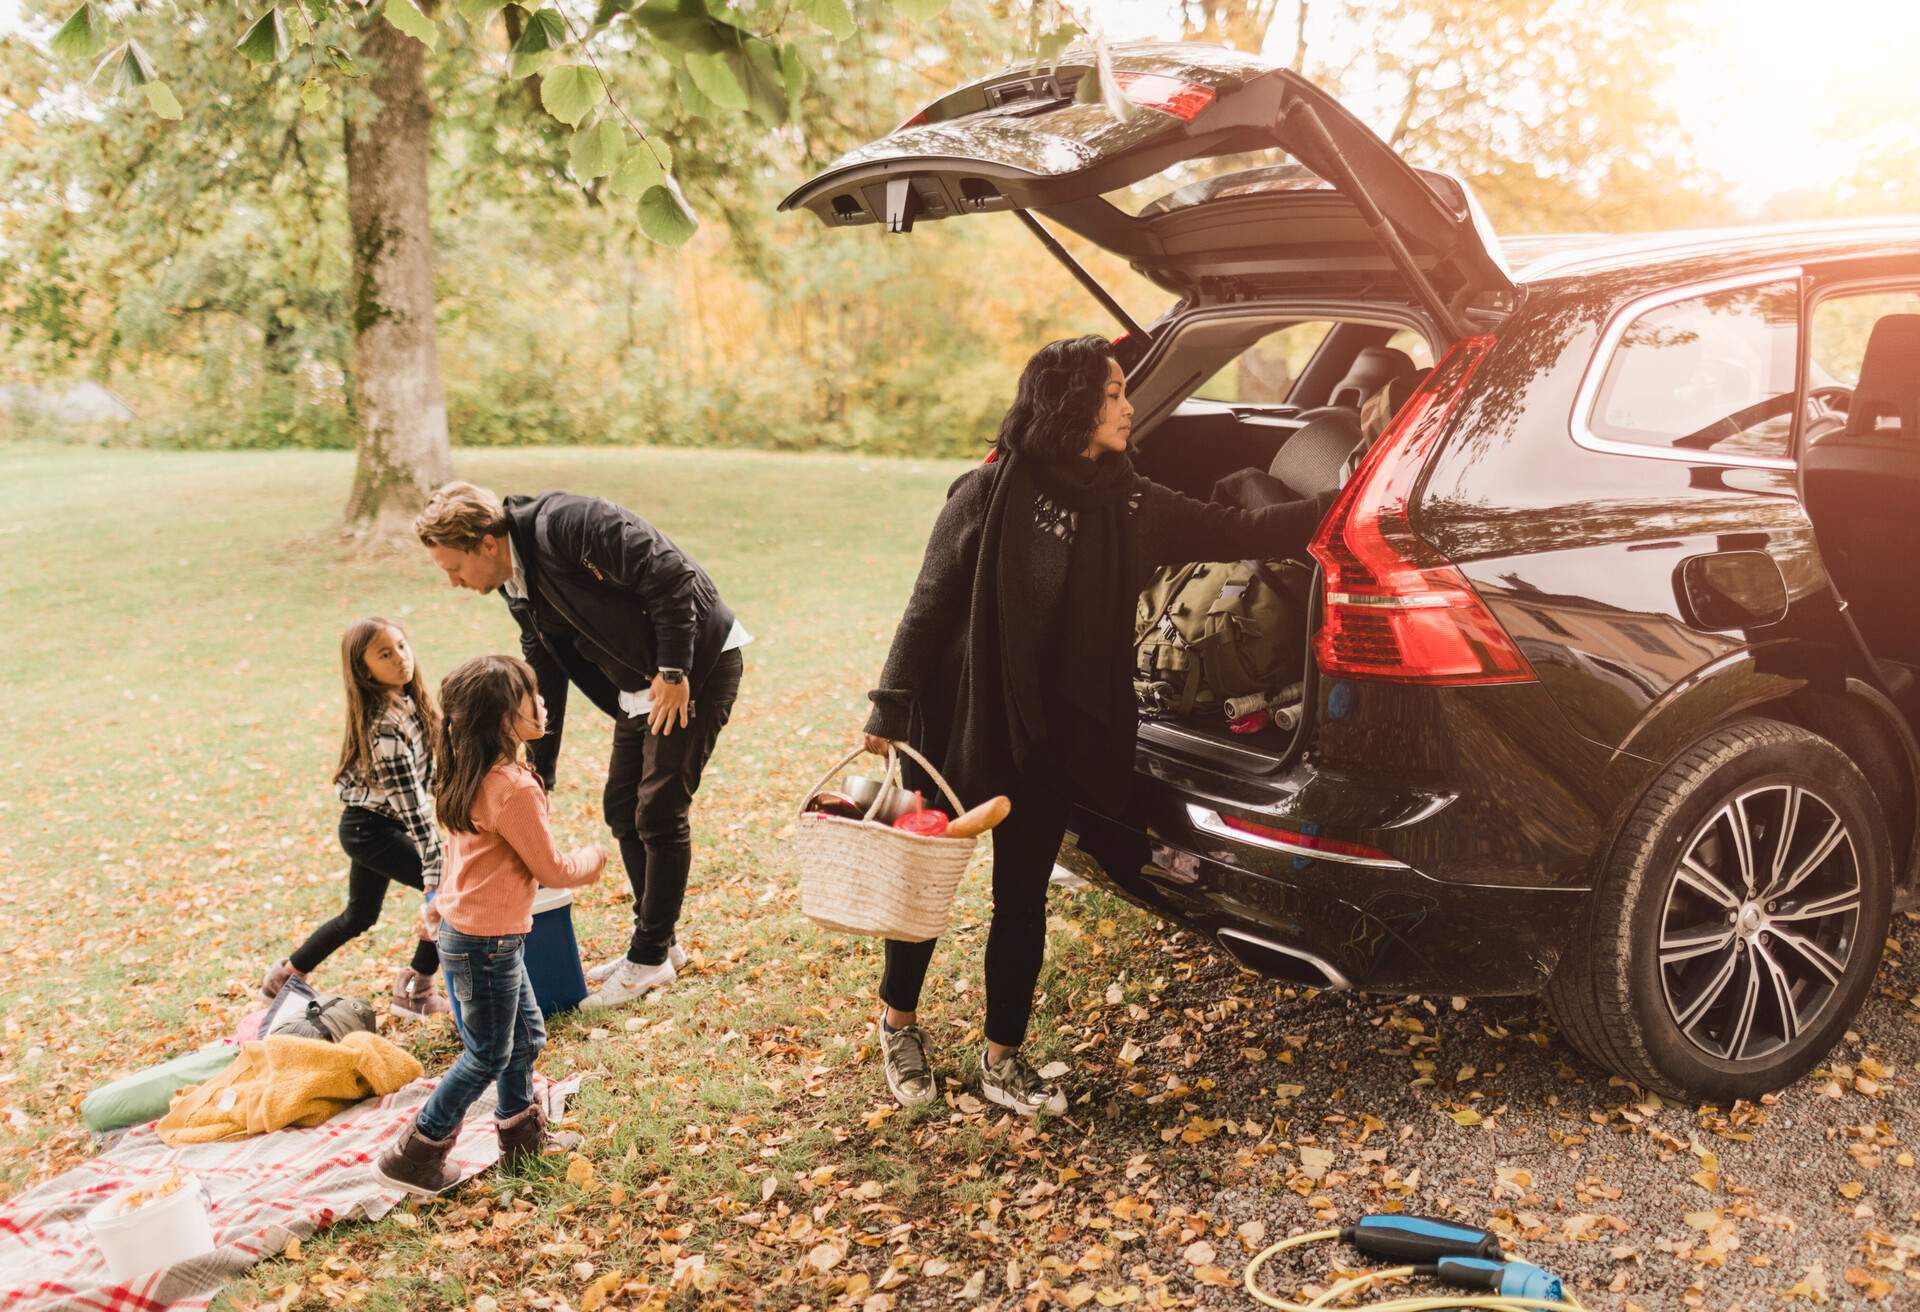 Family of four getting ready for a picnic, next to a black car at a park.